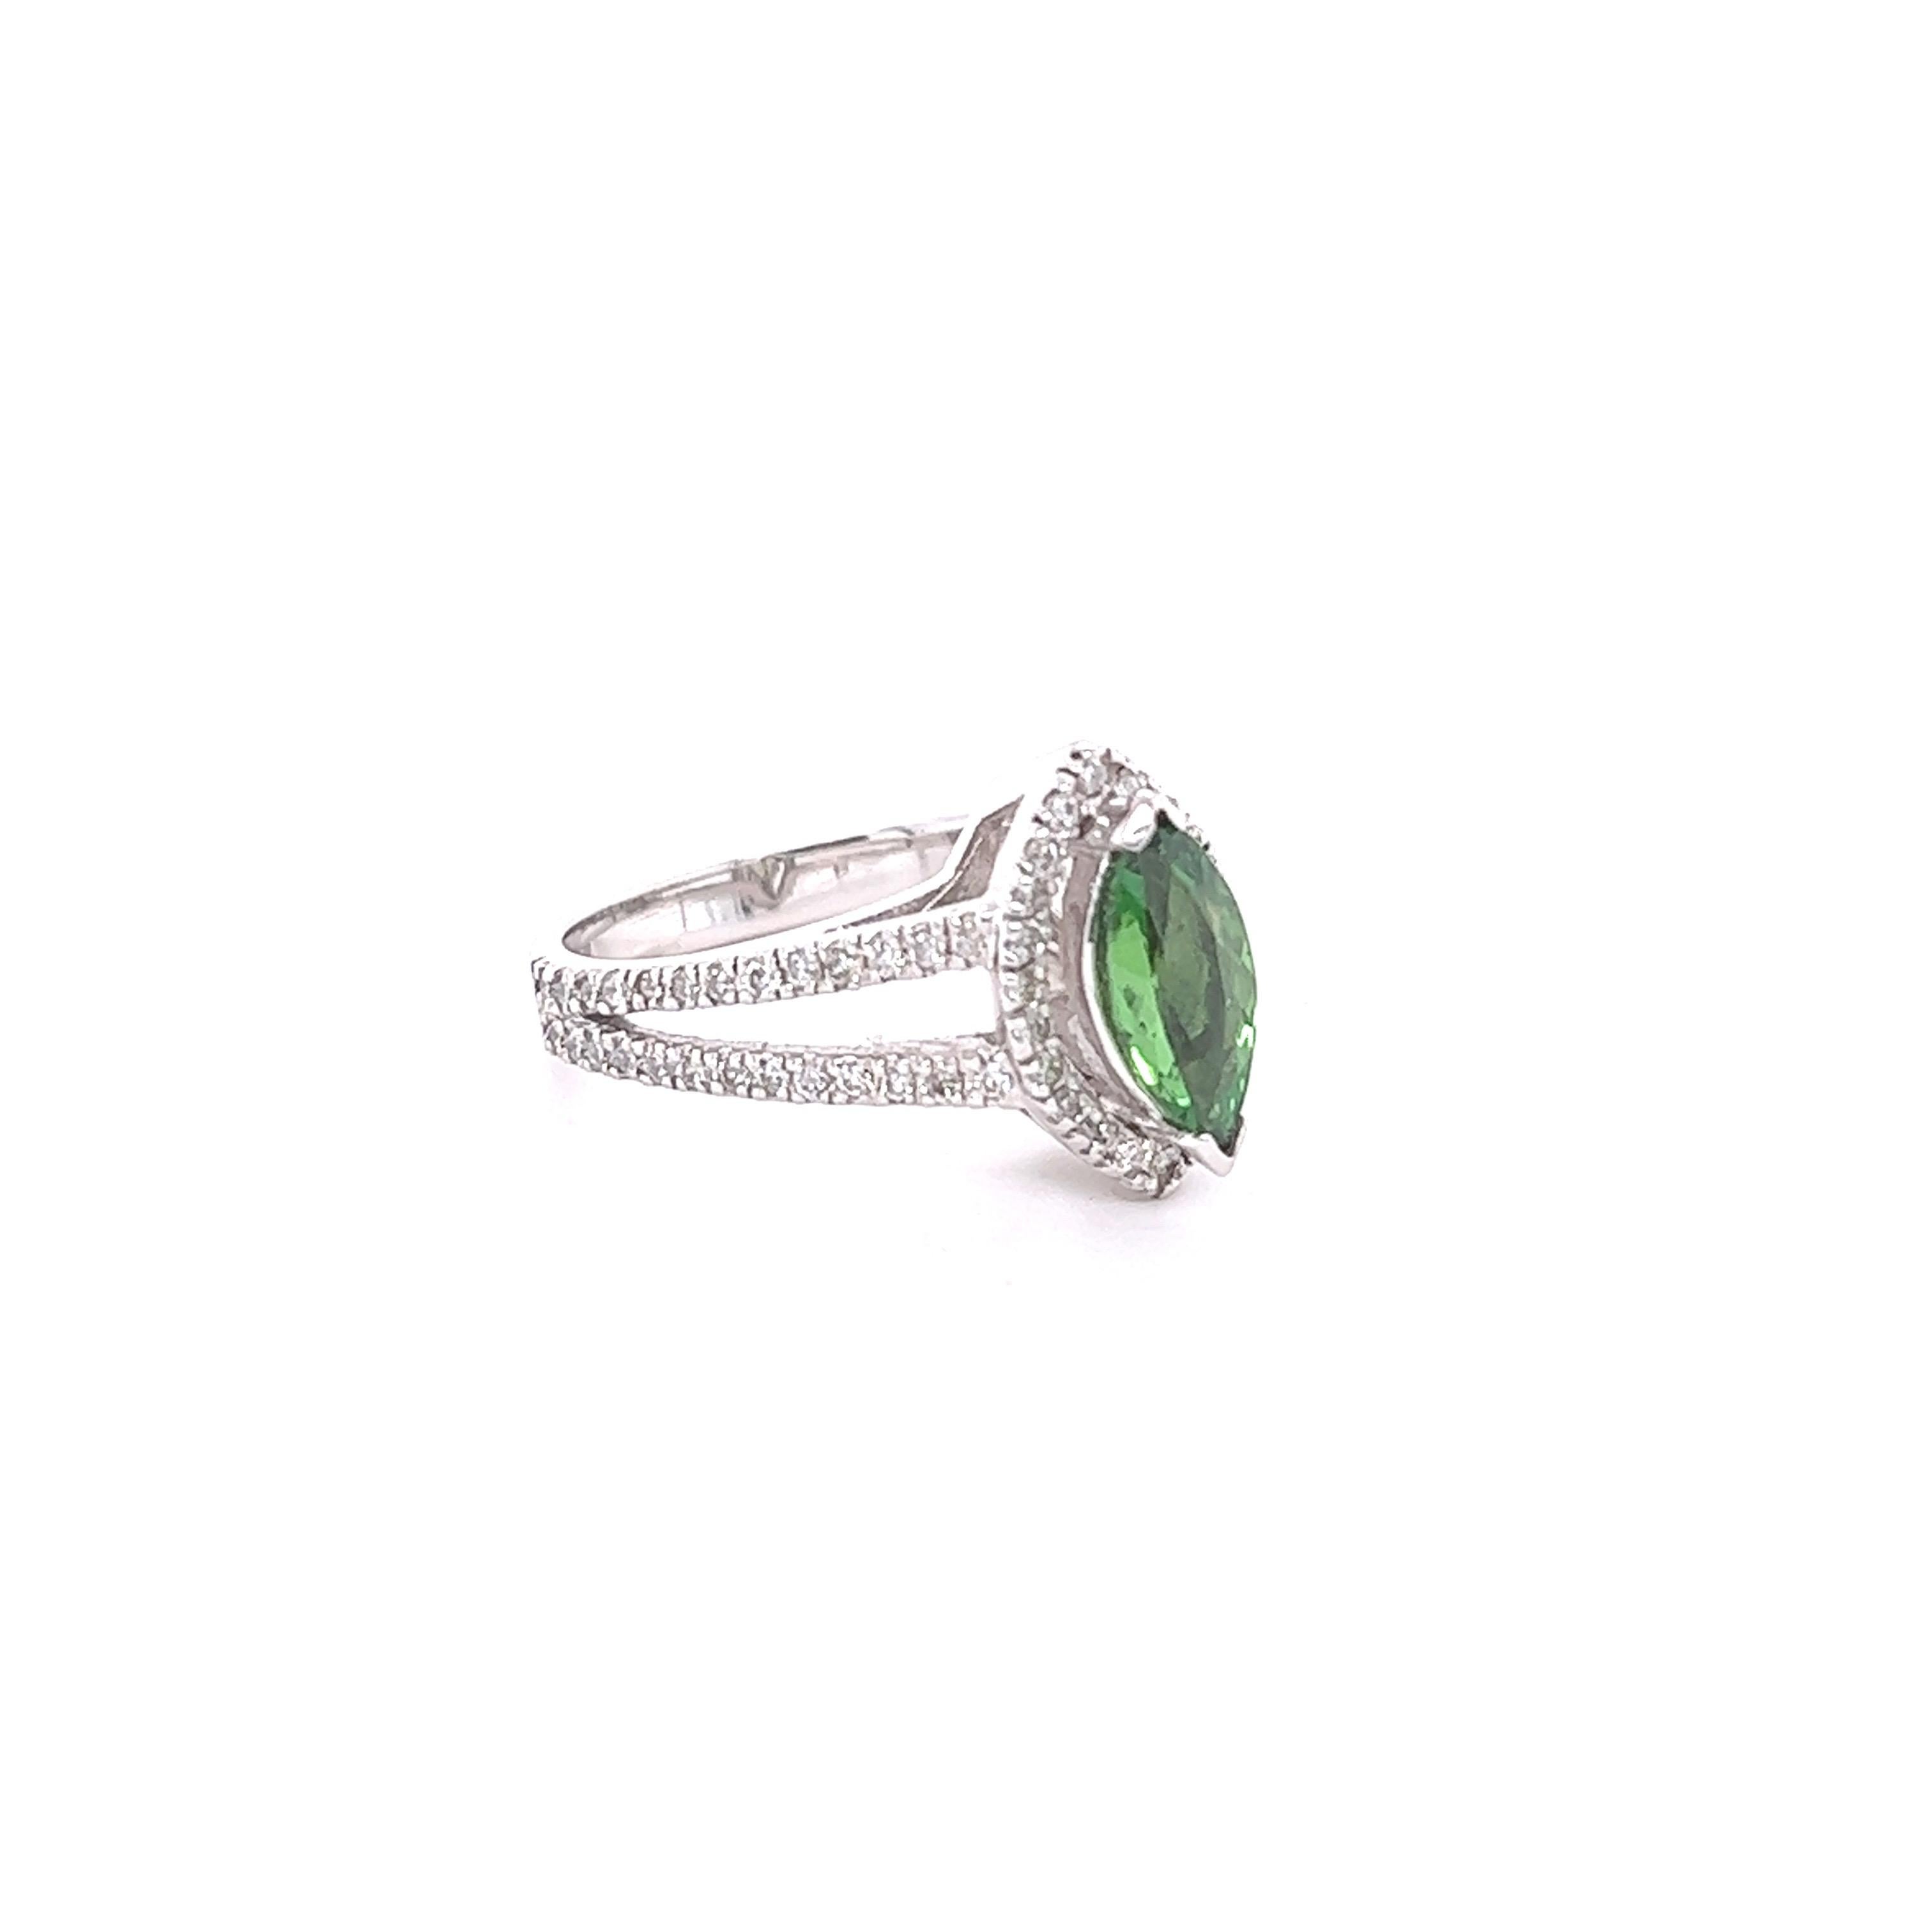 1.62 Carat Marquise Cut Tsavorite Diamond White Gold Engagement Ring In New Condition For Sale In Los Angeles, CA